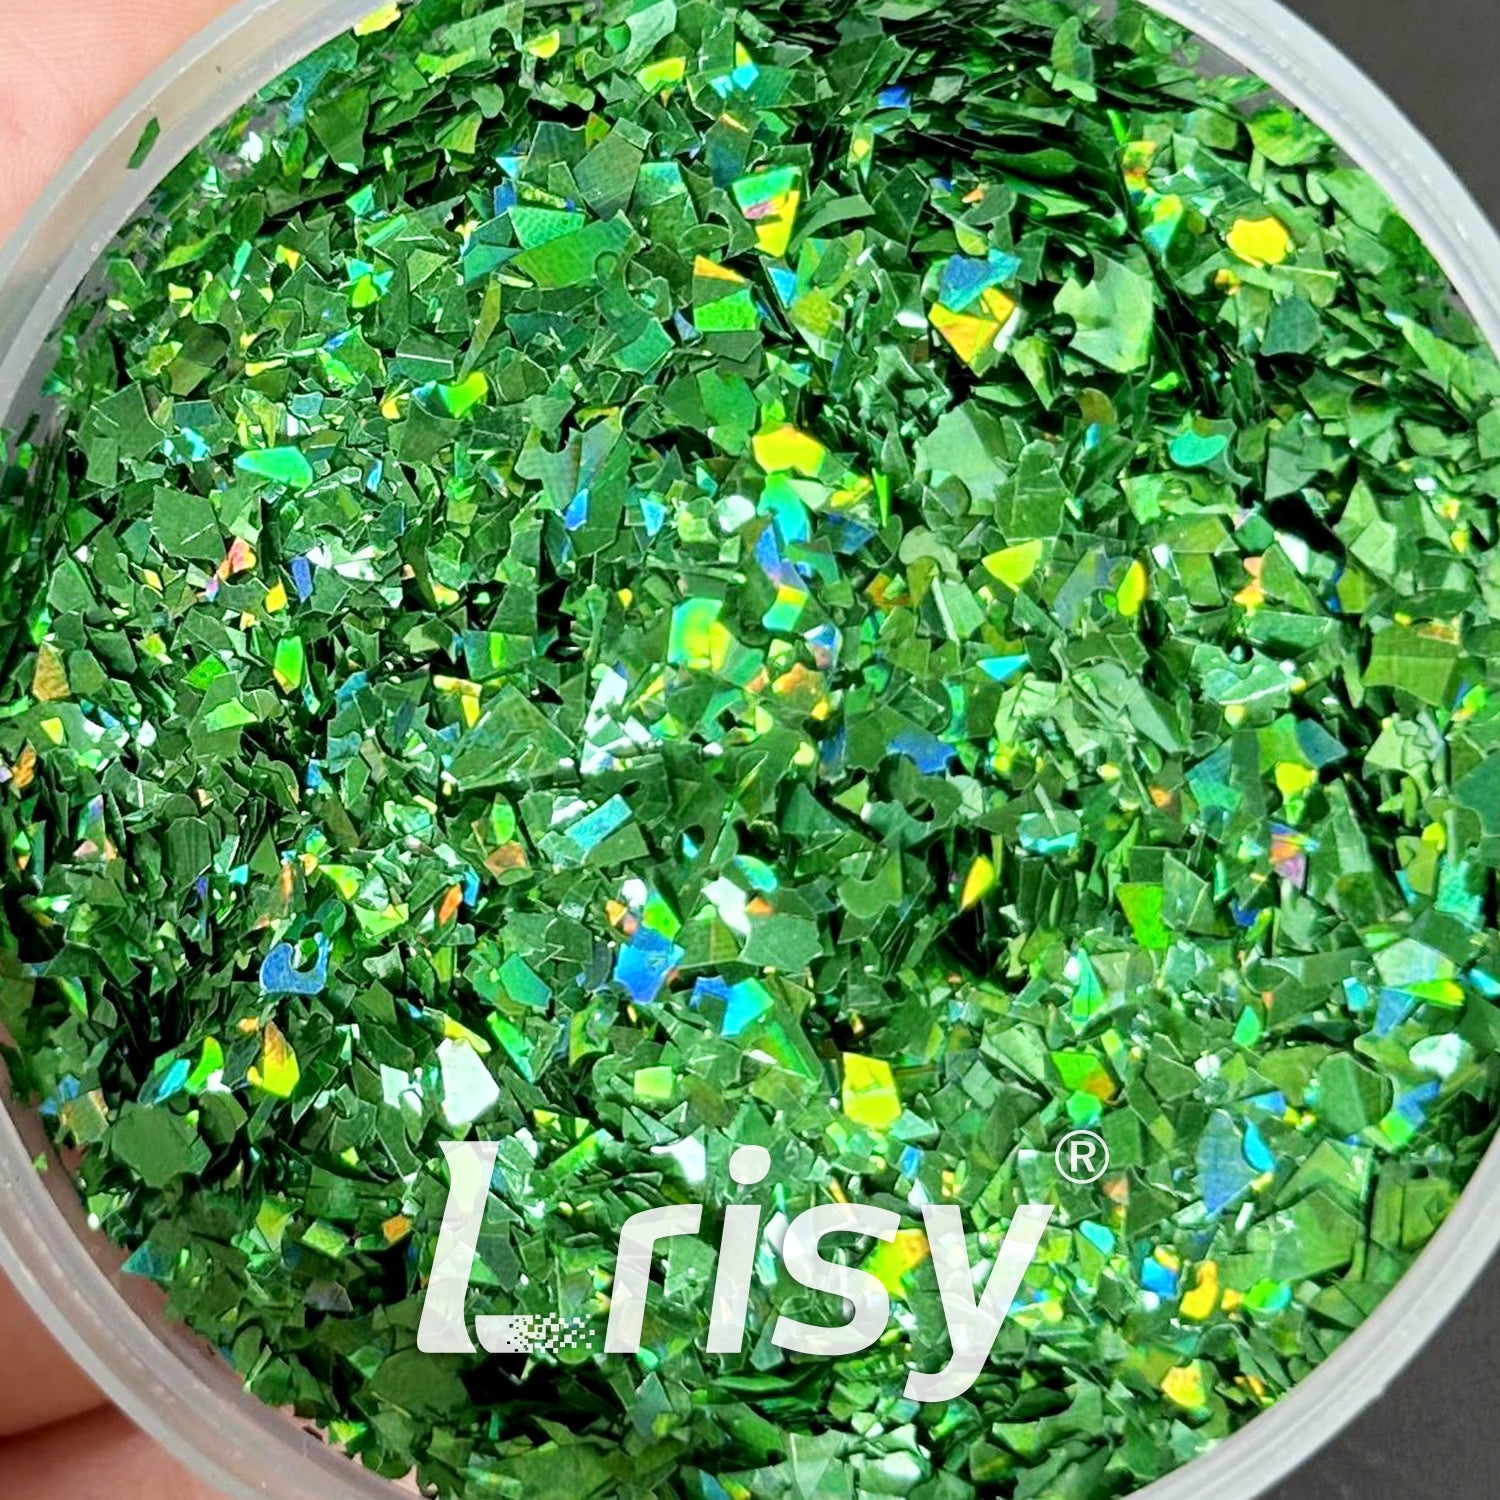 Holographic Dark Green Cellophane Glitter Flakes Holo Shards LB0600 4x4